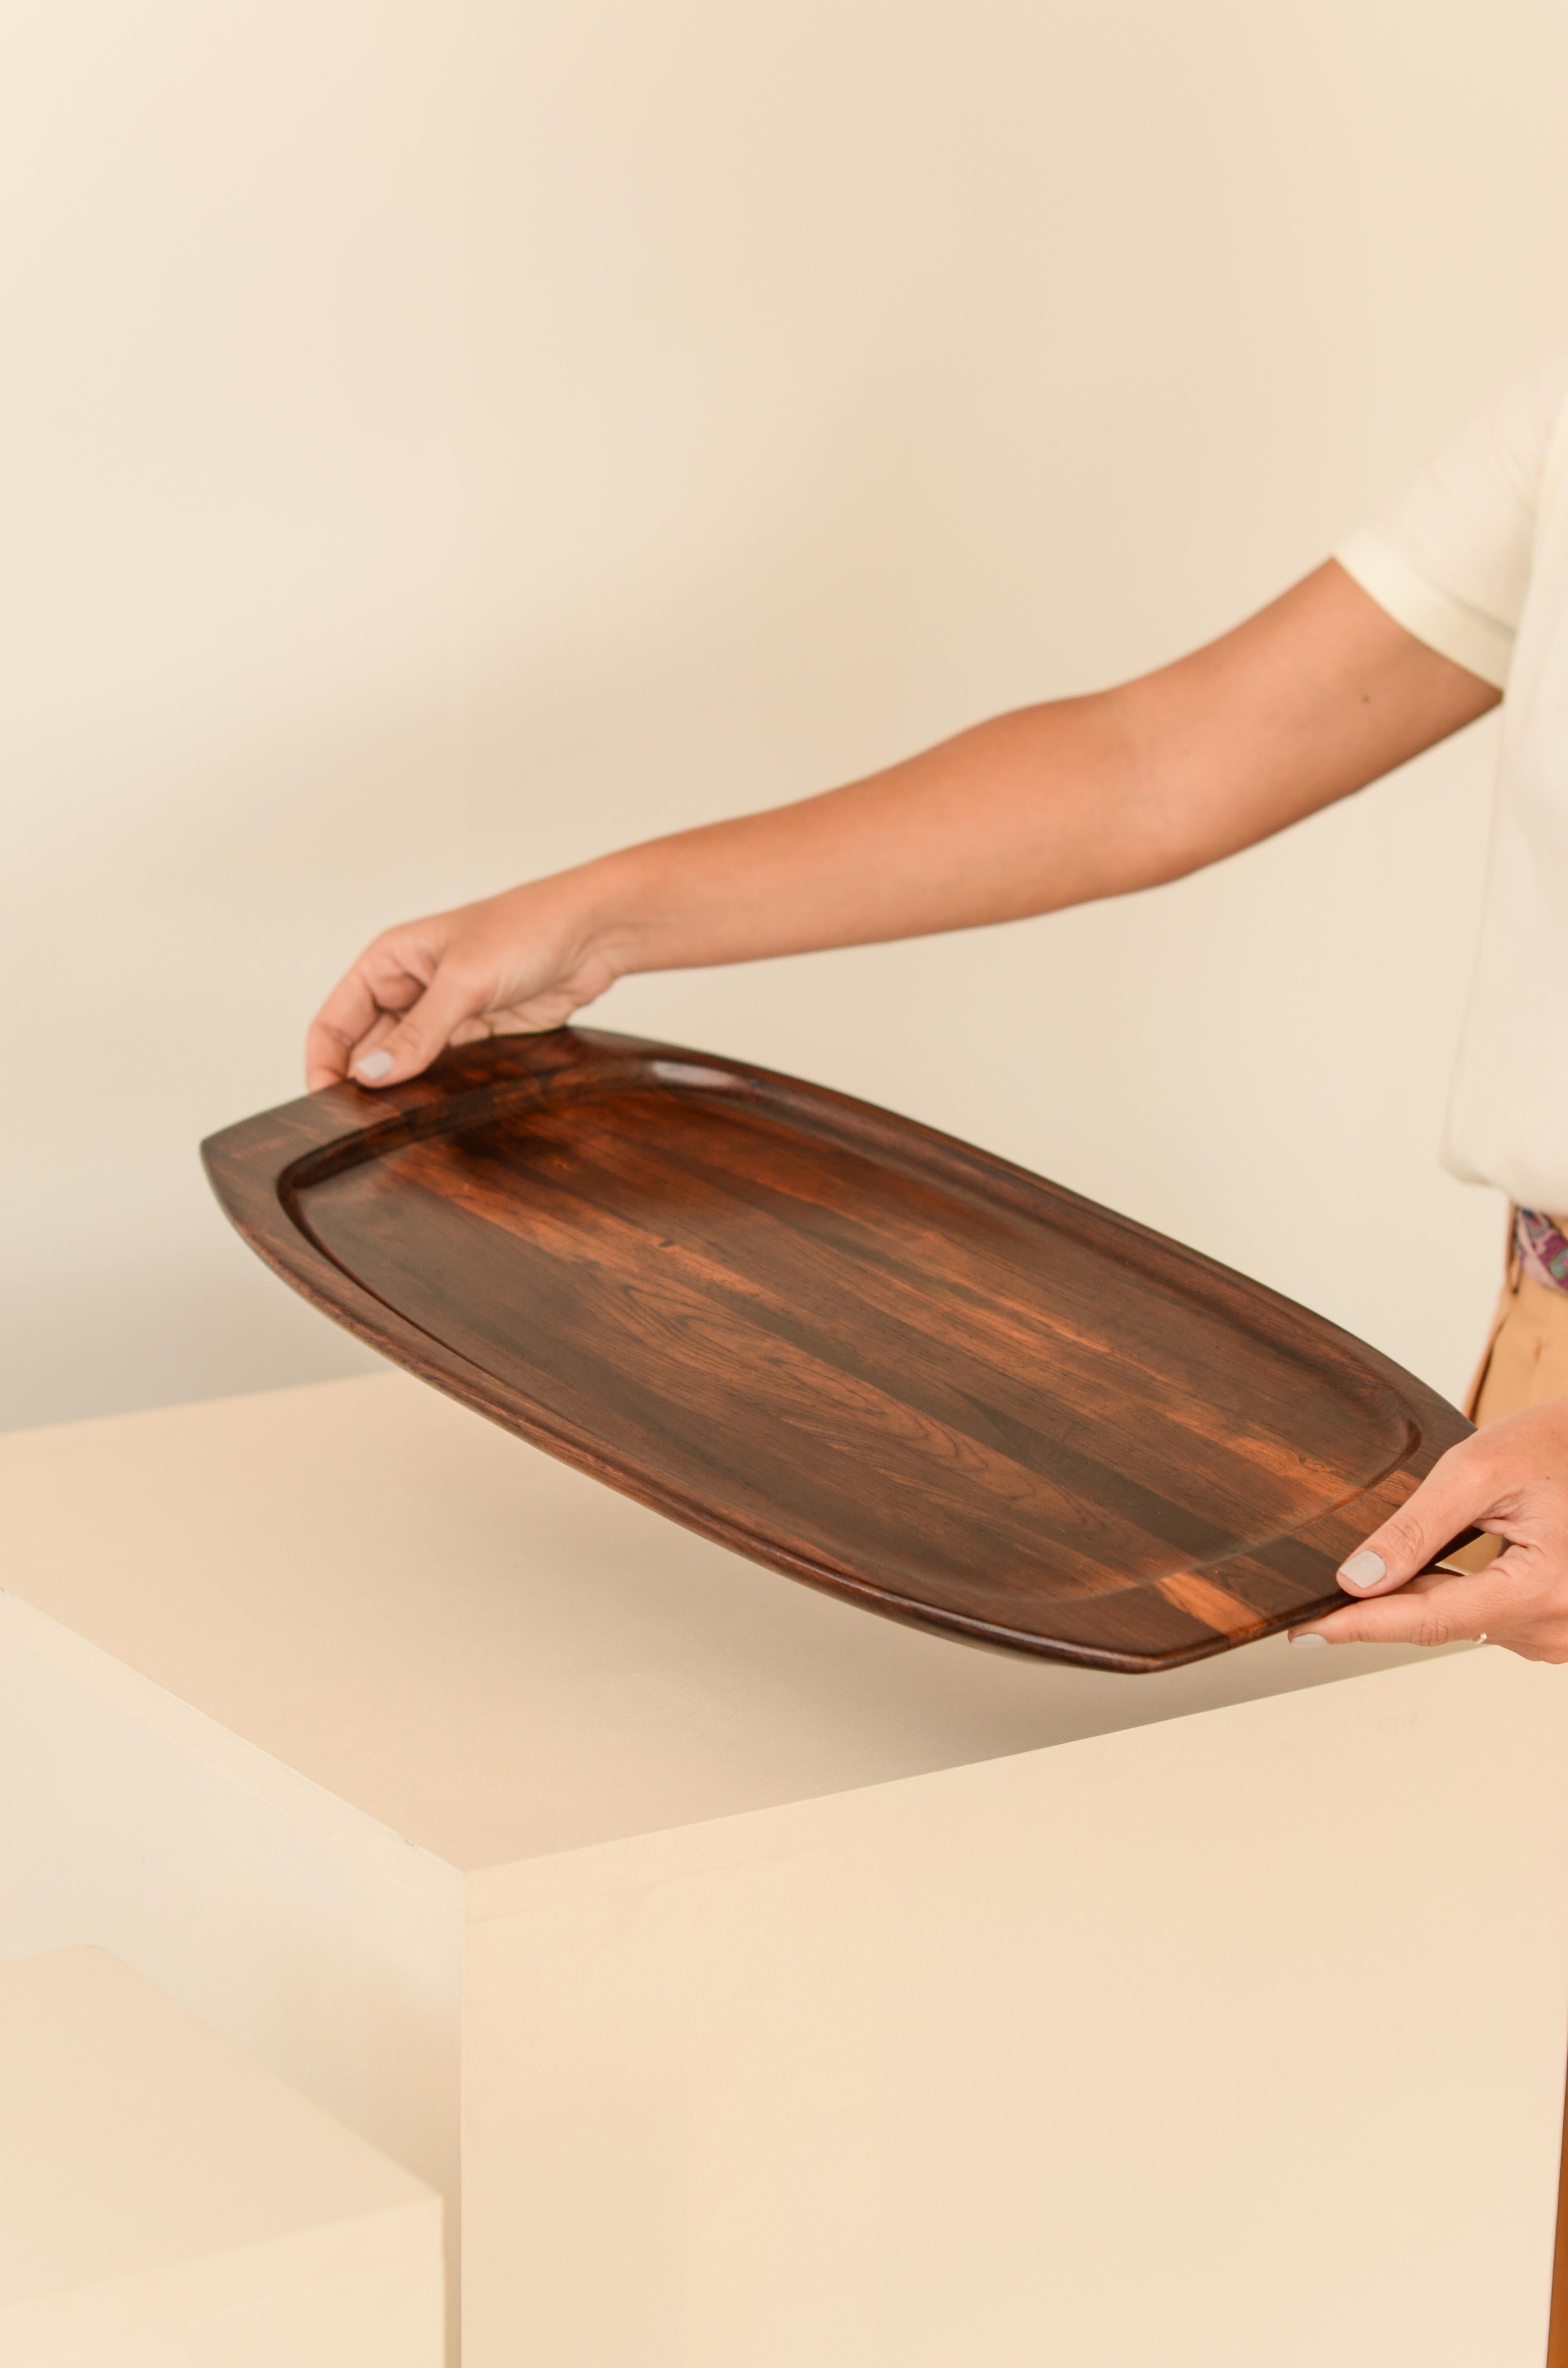 Rare solid rosewood tray by Jean Gillon model 732 from the WoodArt catalogue.

Jean Gillon (1919-2007) was born in Romania, where he graduated in Architecture and Fine Arts. In 1956 he moved to Brazil, where he developed an impressive and vast work